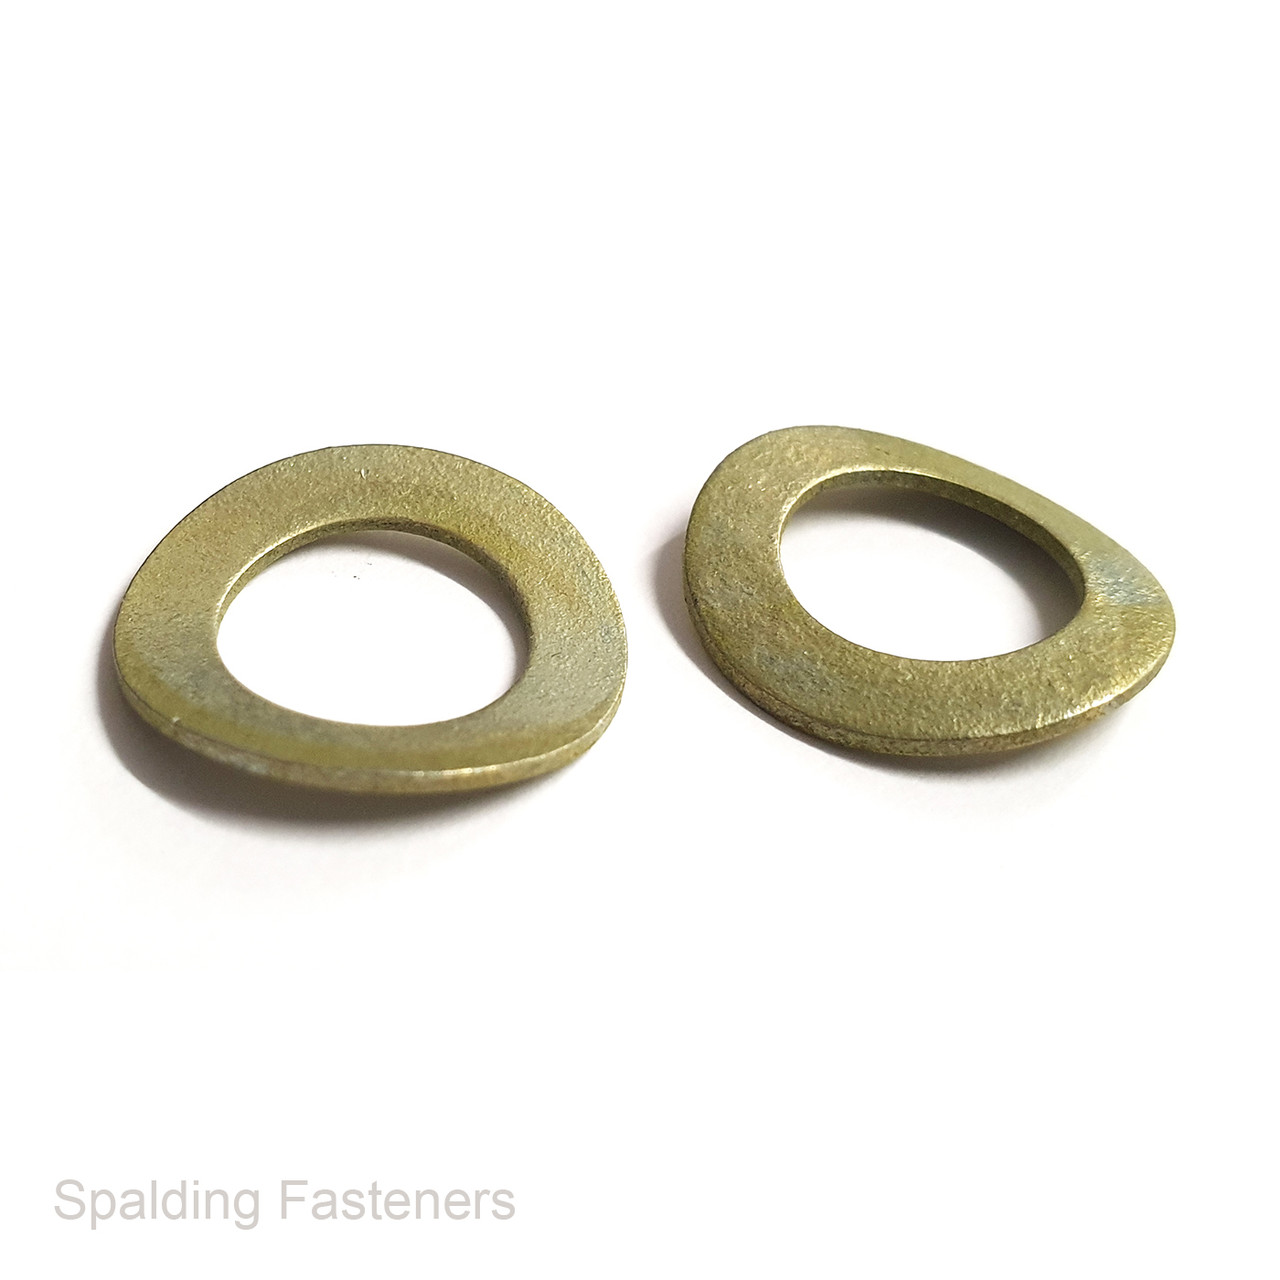 METRIC CURVED RING WASHERS DIN1374 ZINC YELLOW